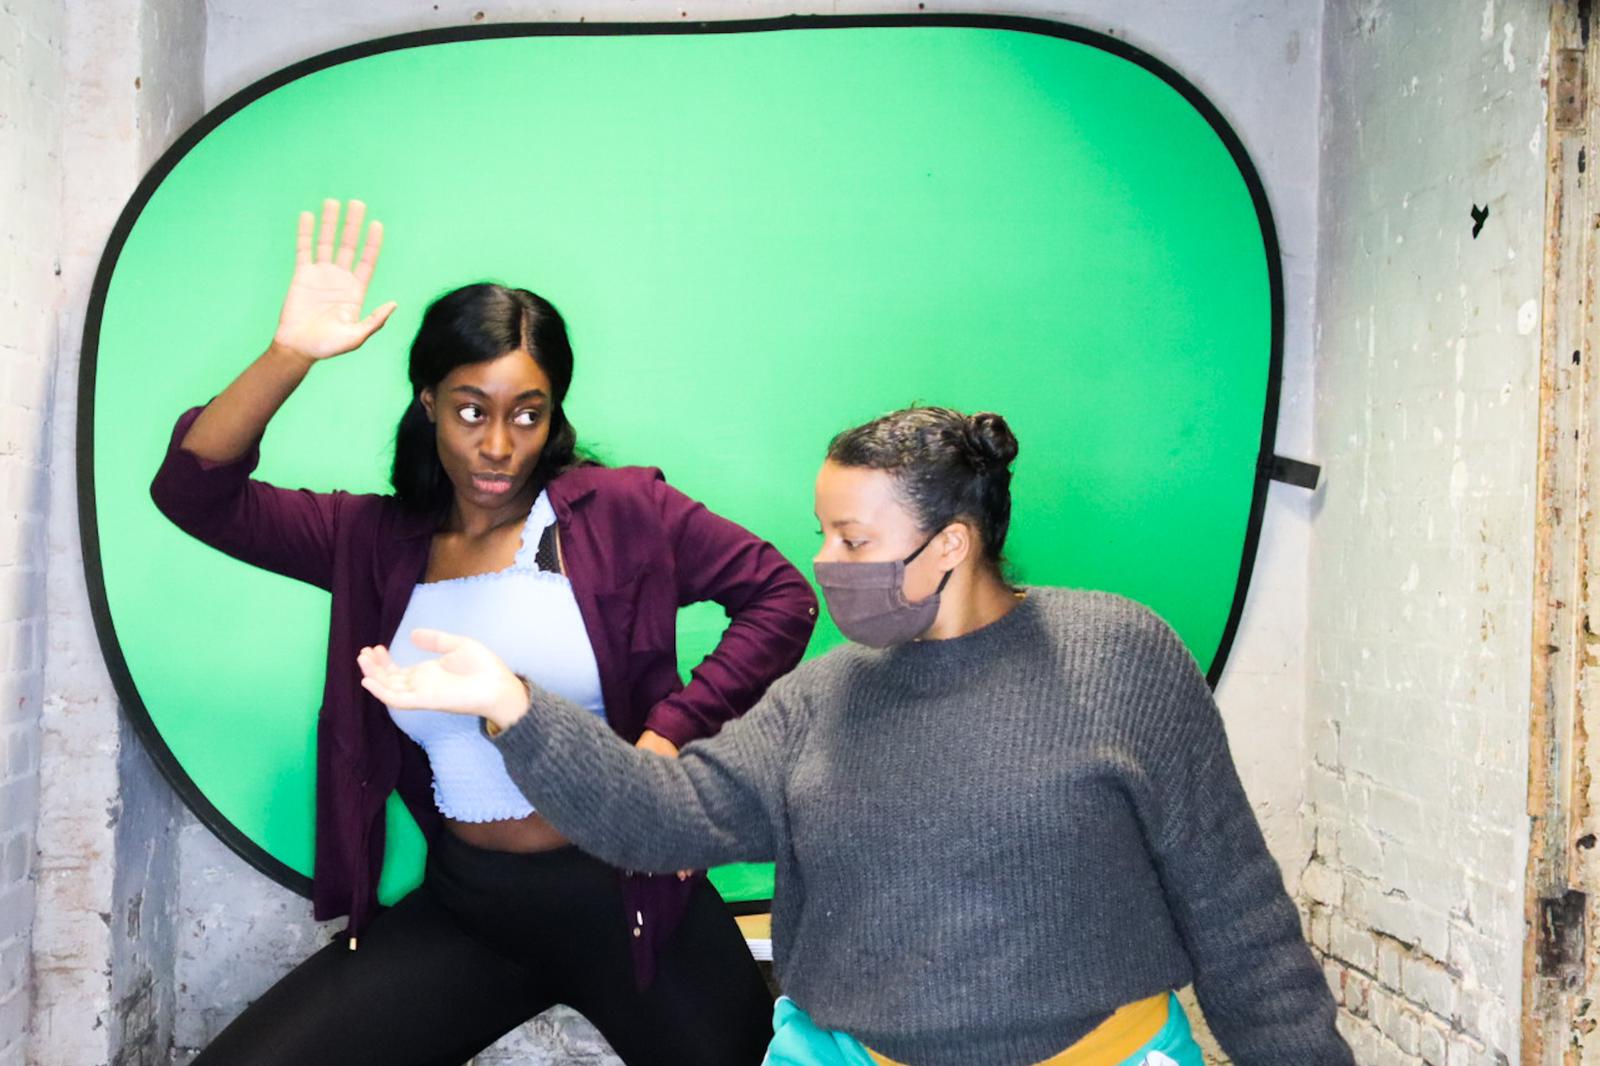 Two performers gesturing in front of a green screen.